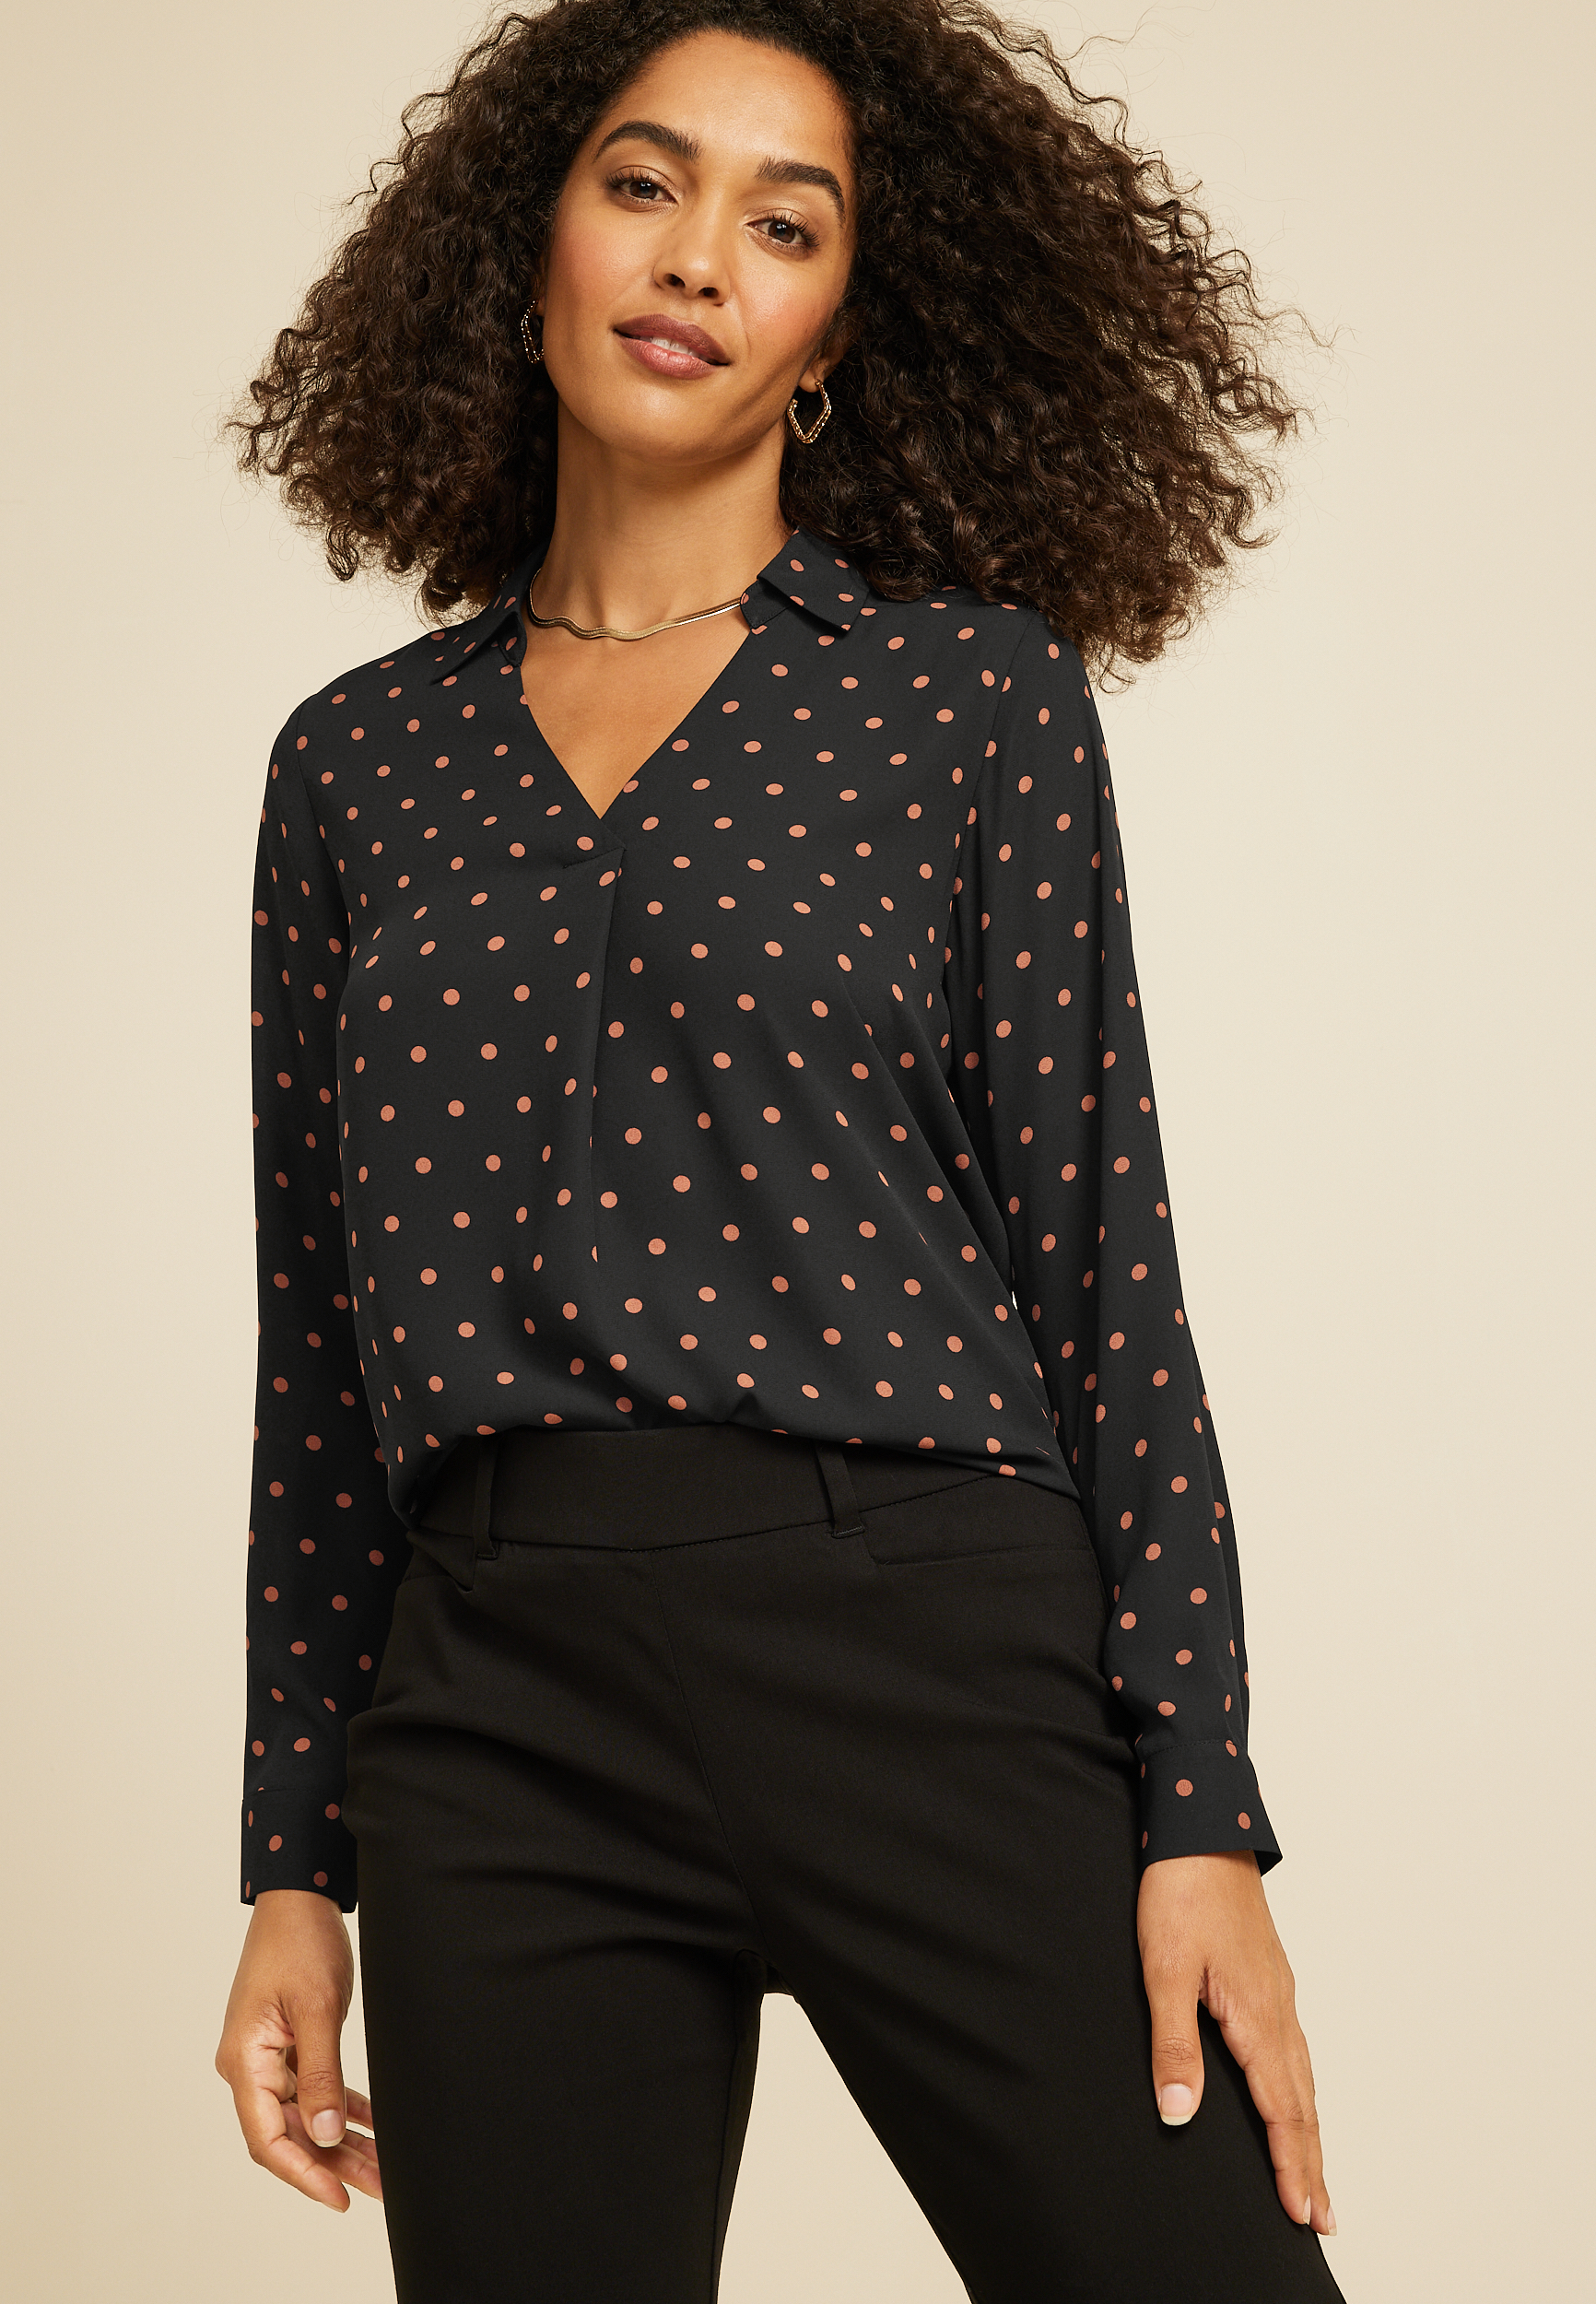 Atwood Pleated Polka Dot Blouse | maurices